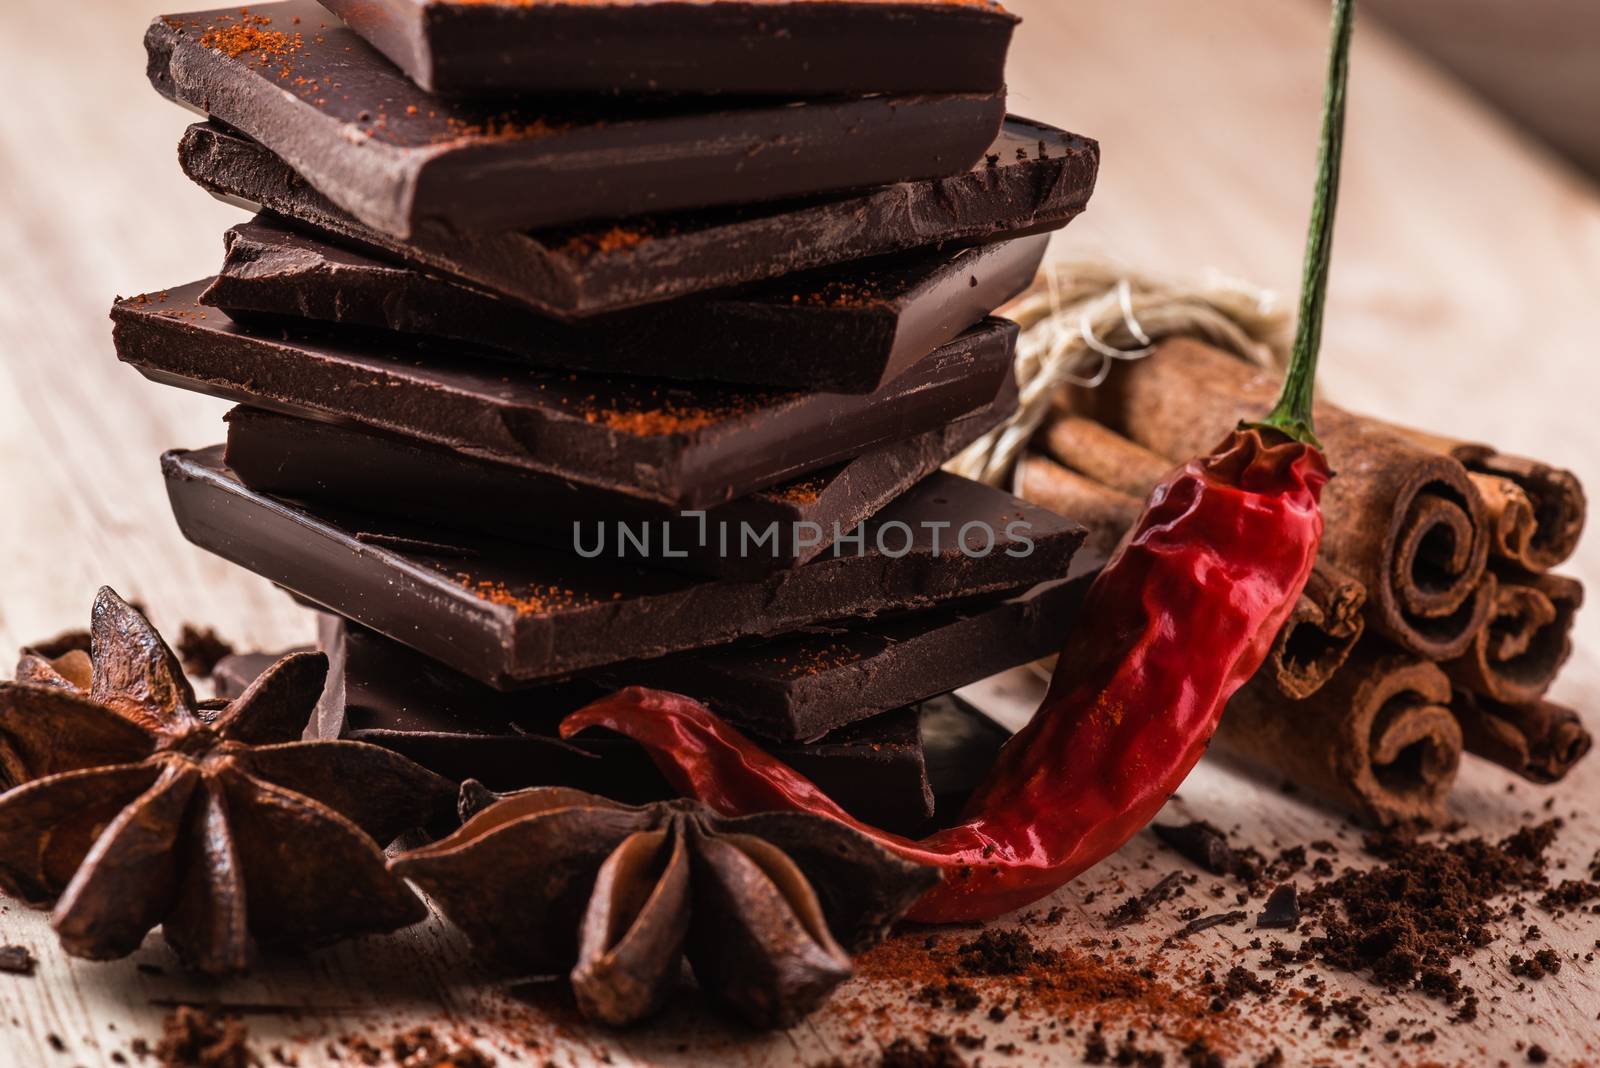 Dry Chili Pepper with Chocolate, Anise Star and Cinnamon Sticks